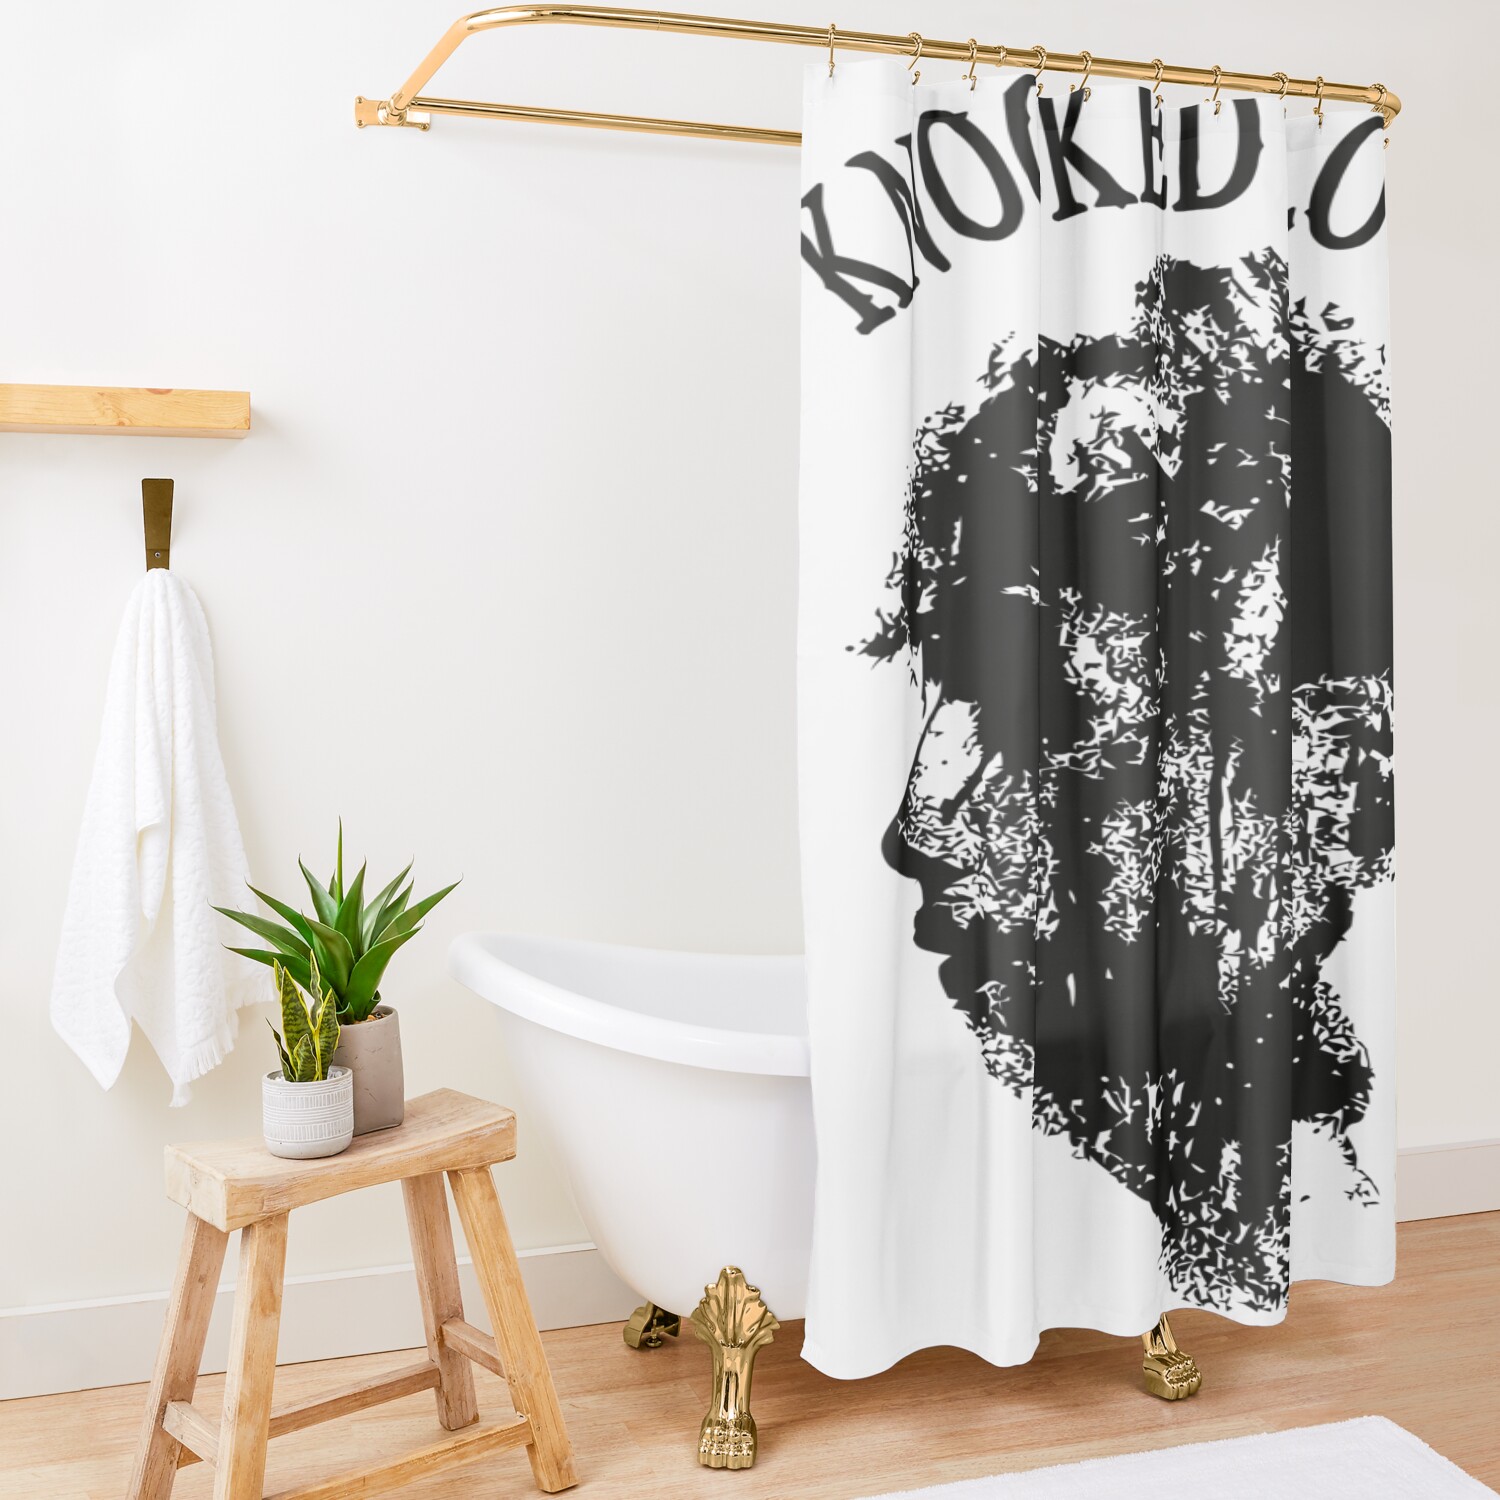 urshower curtain opensquare1500x1500 5 - Knocked Loose Shop